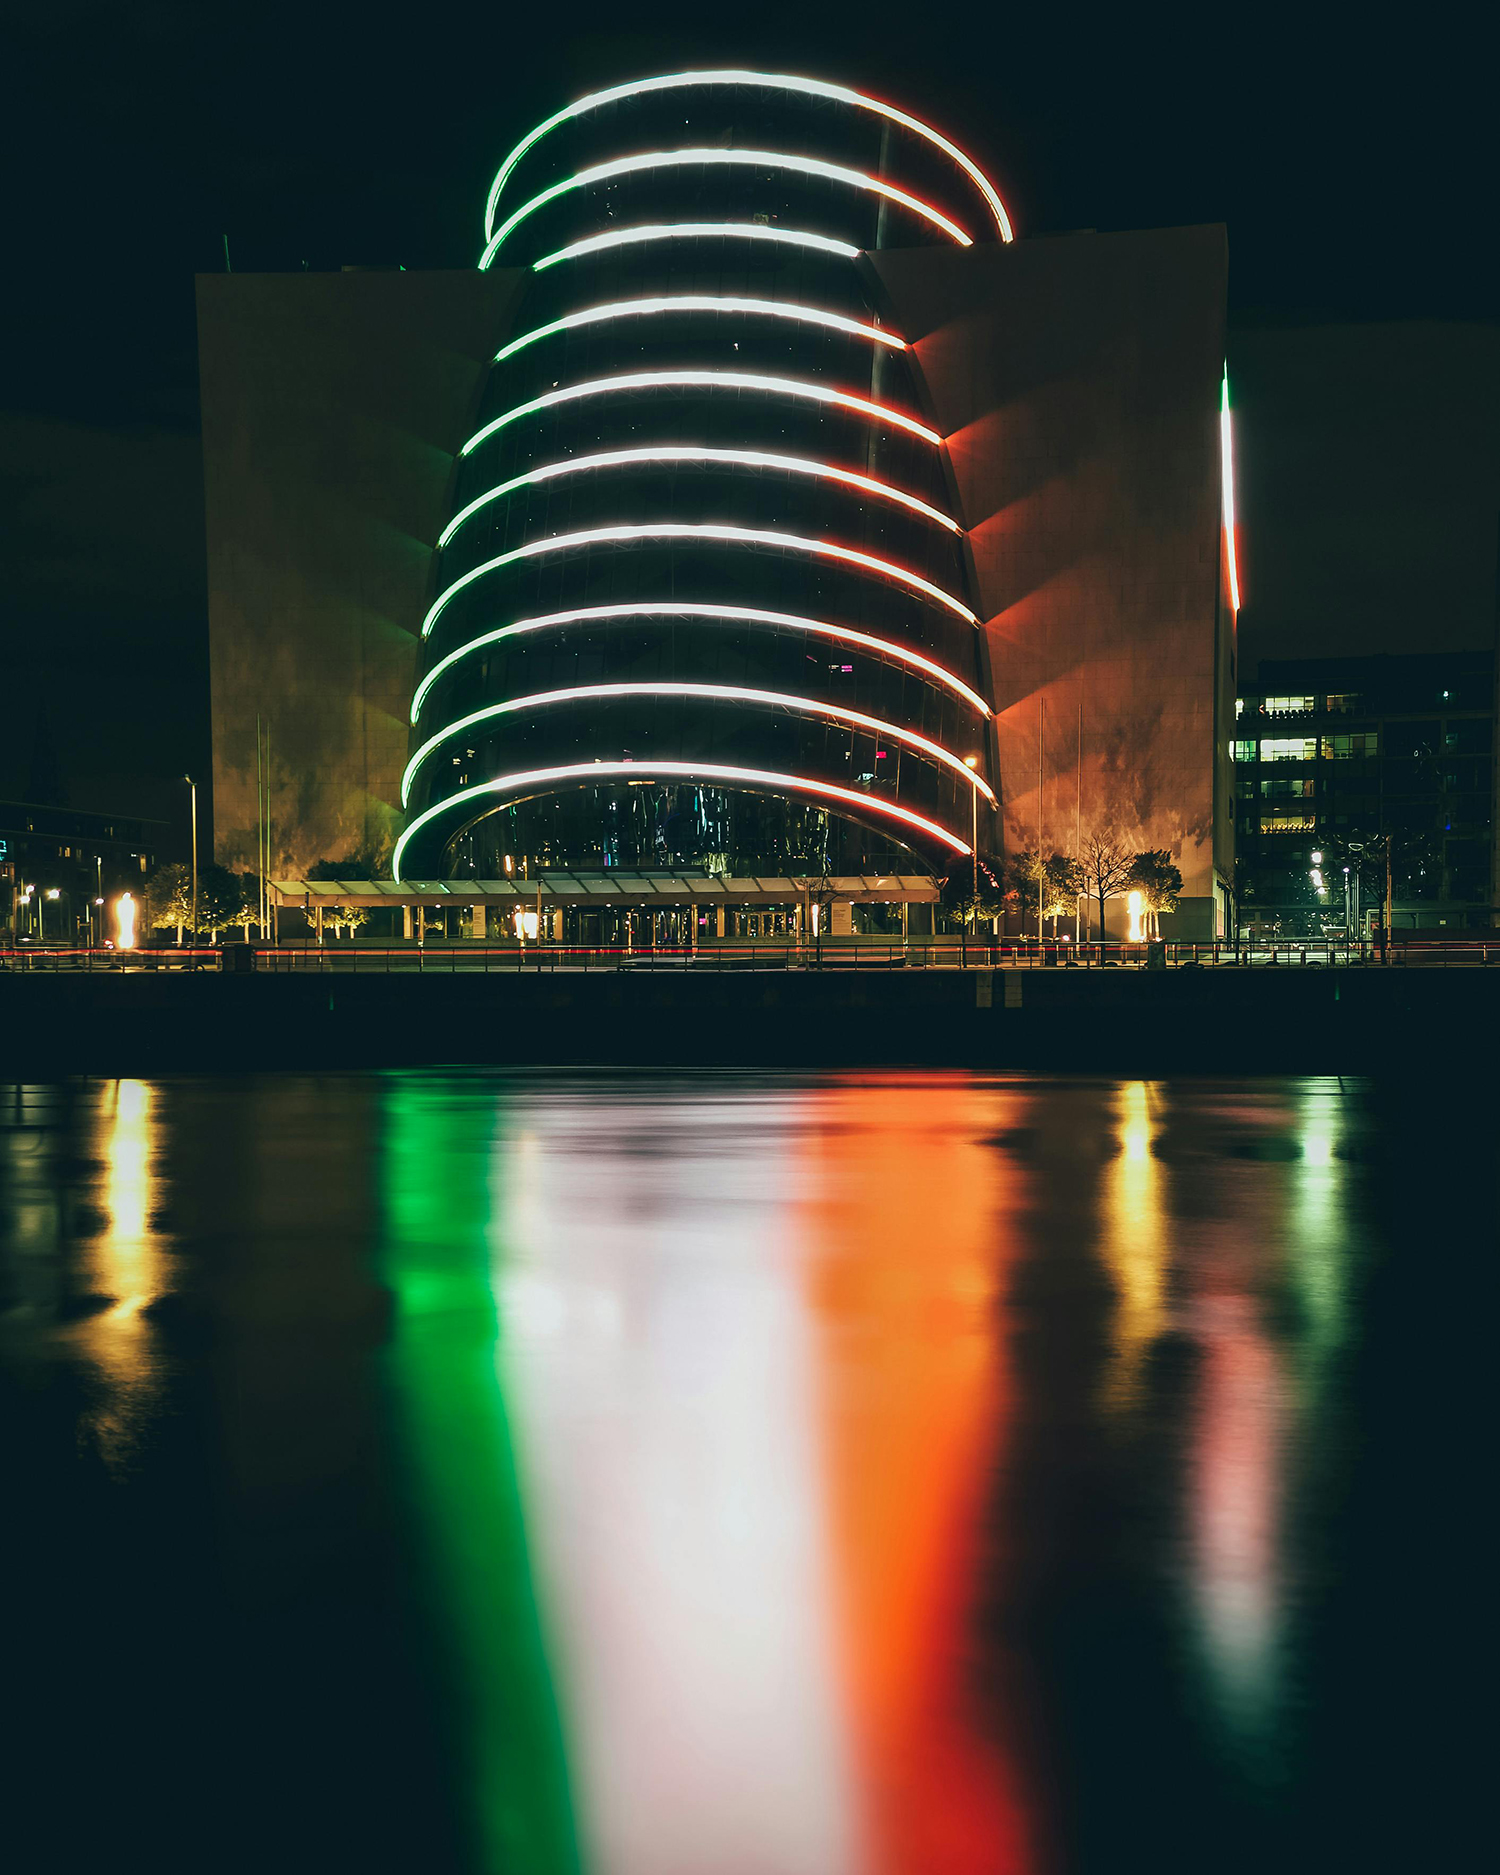 Dublin City national conference centre, with lights reflected in the river Liffey